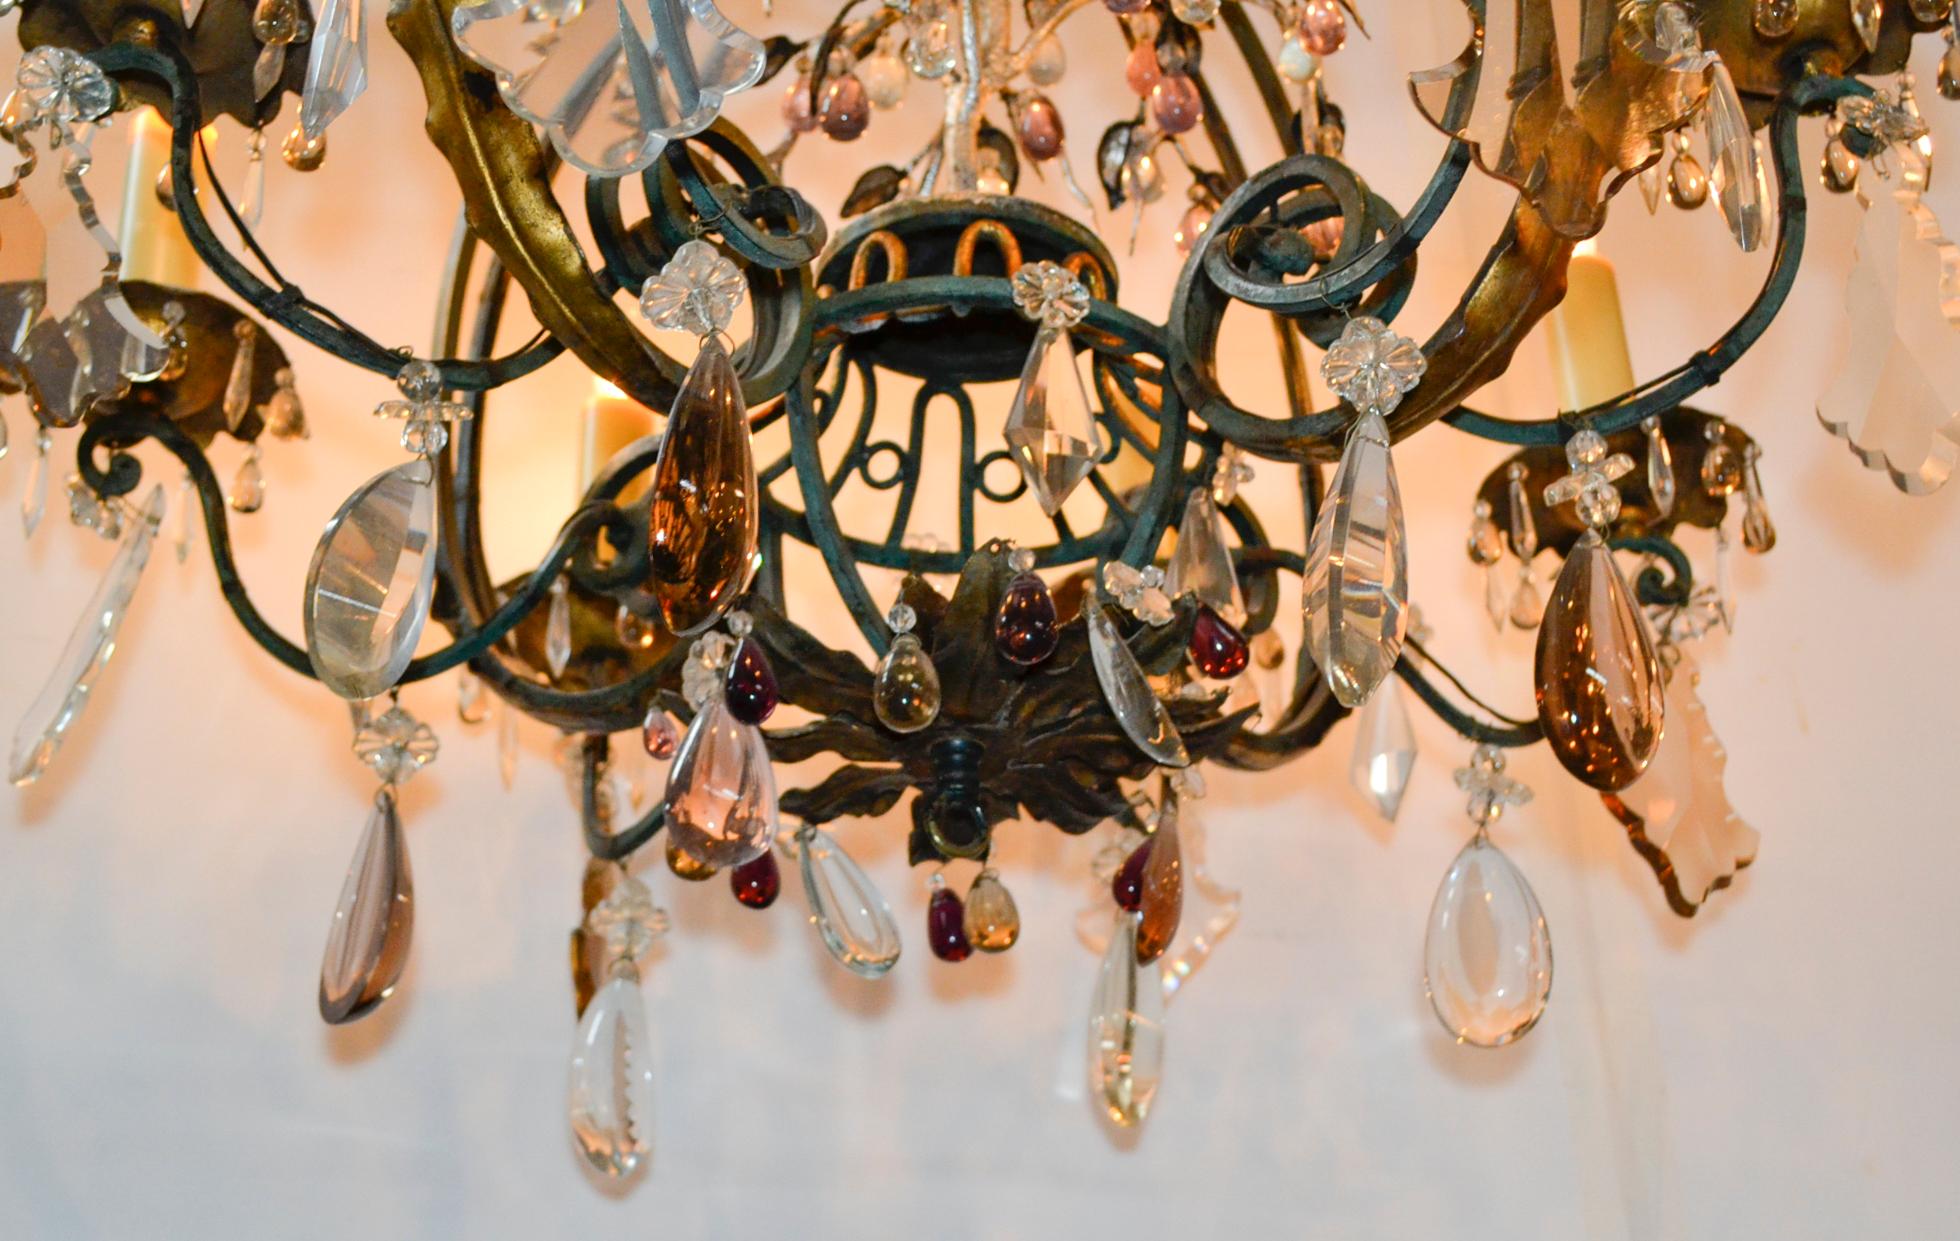 Unusual 19th century French iron and crystal chandelier with amethyst drops.